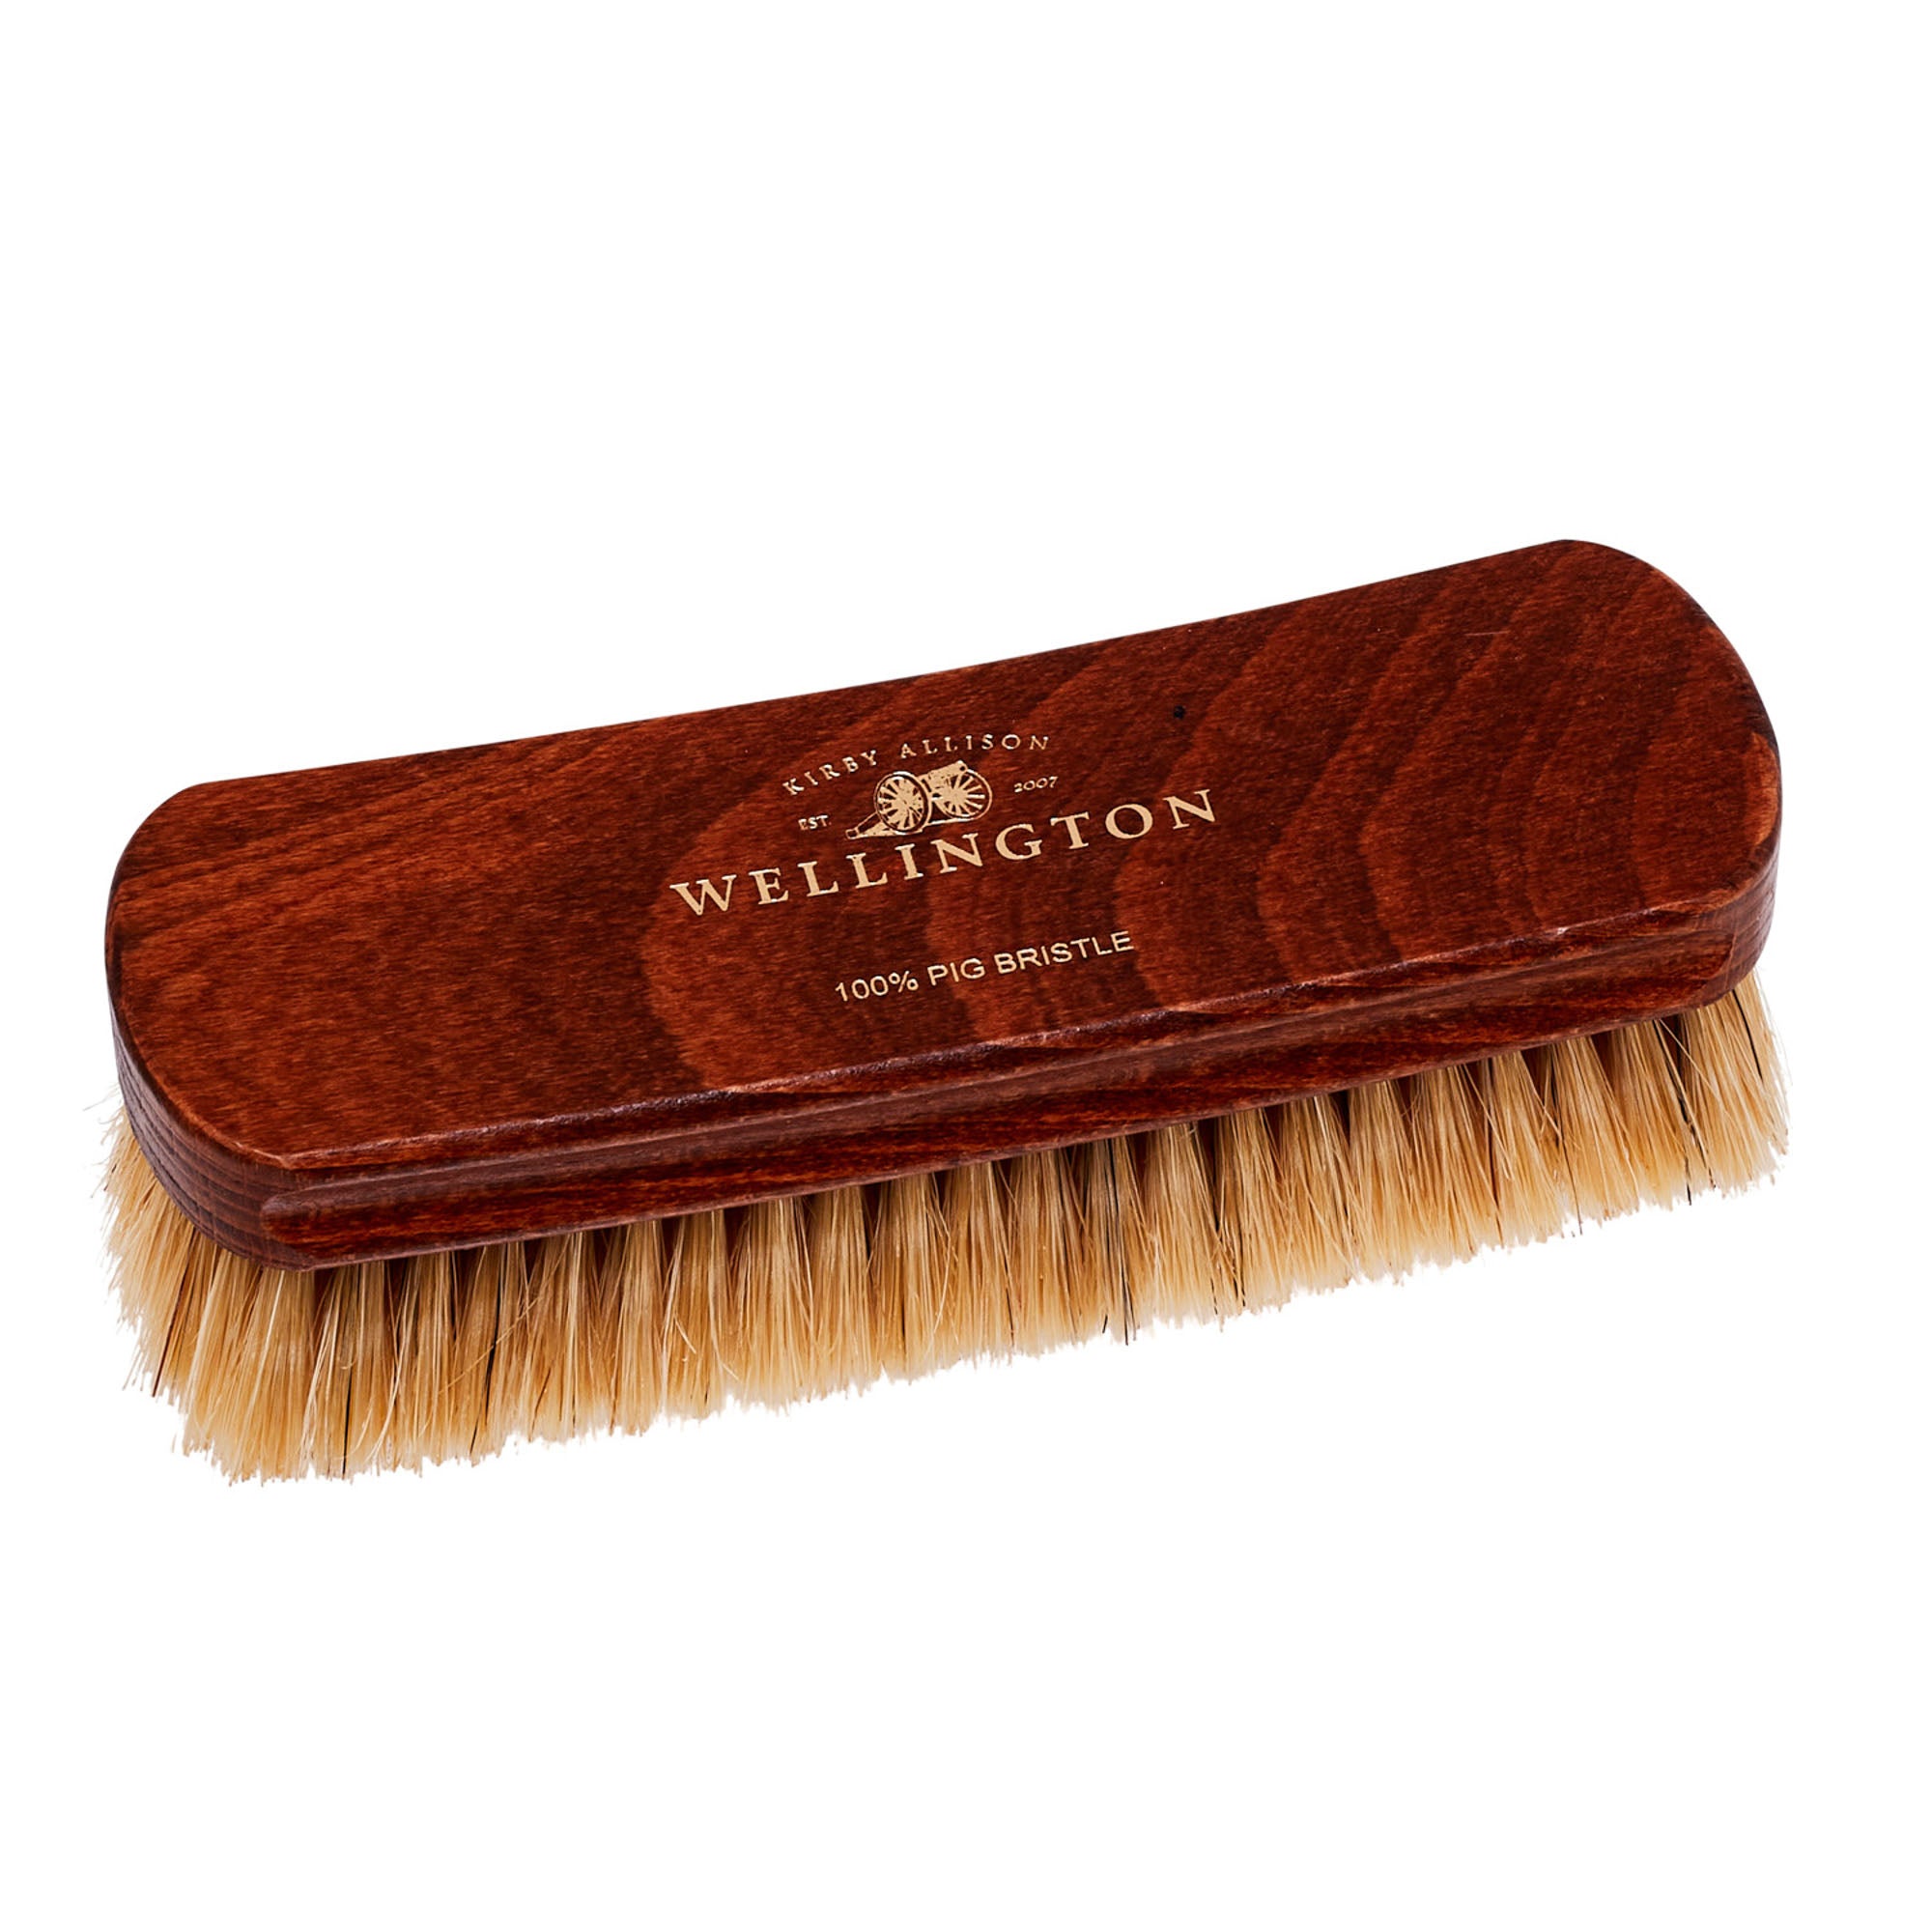 A Deluxe Wellington Pig Bristle Shoe Polishing Brush by KirbyAllison.com with a wooden handle.